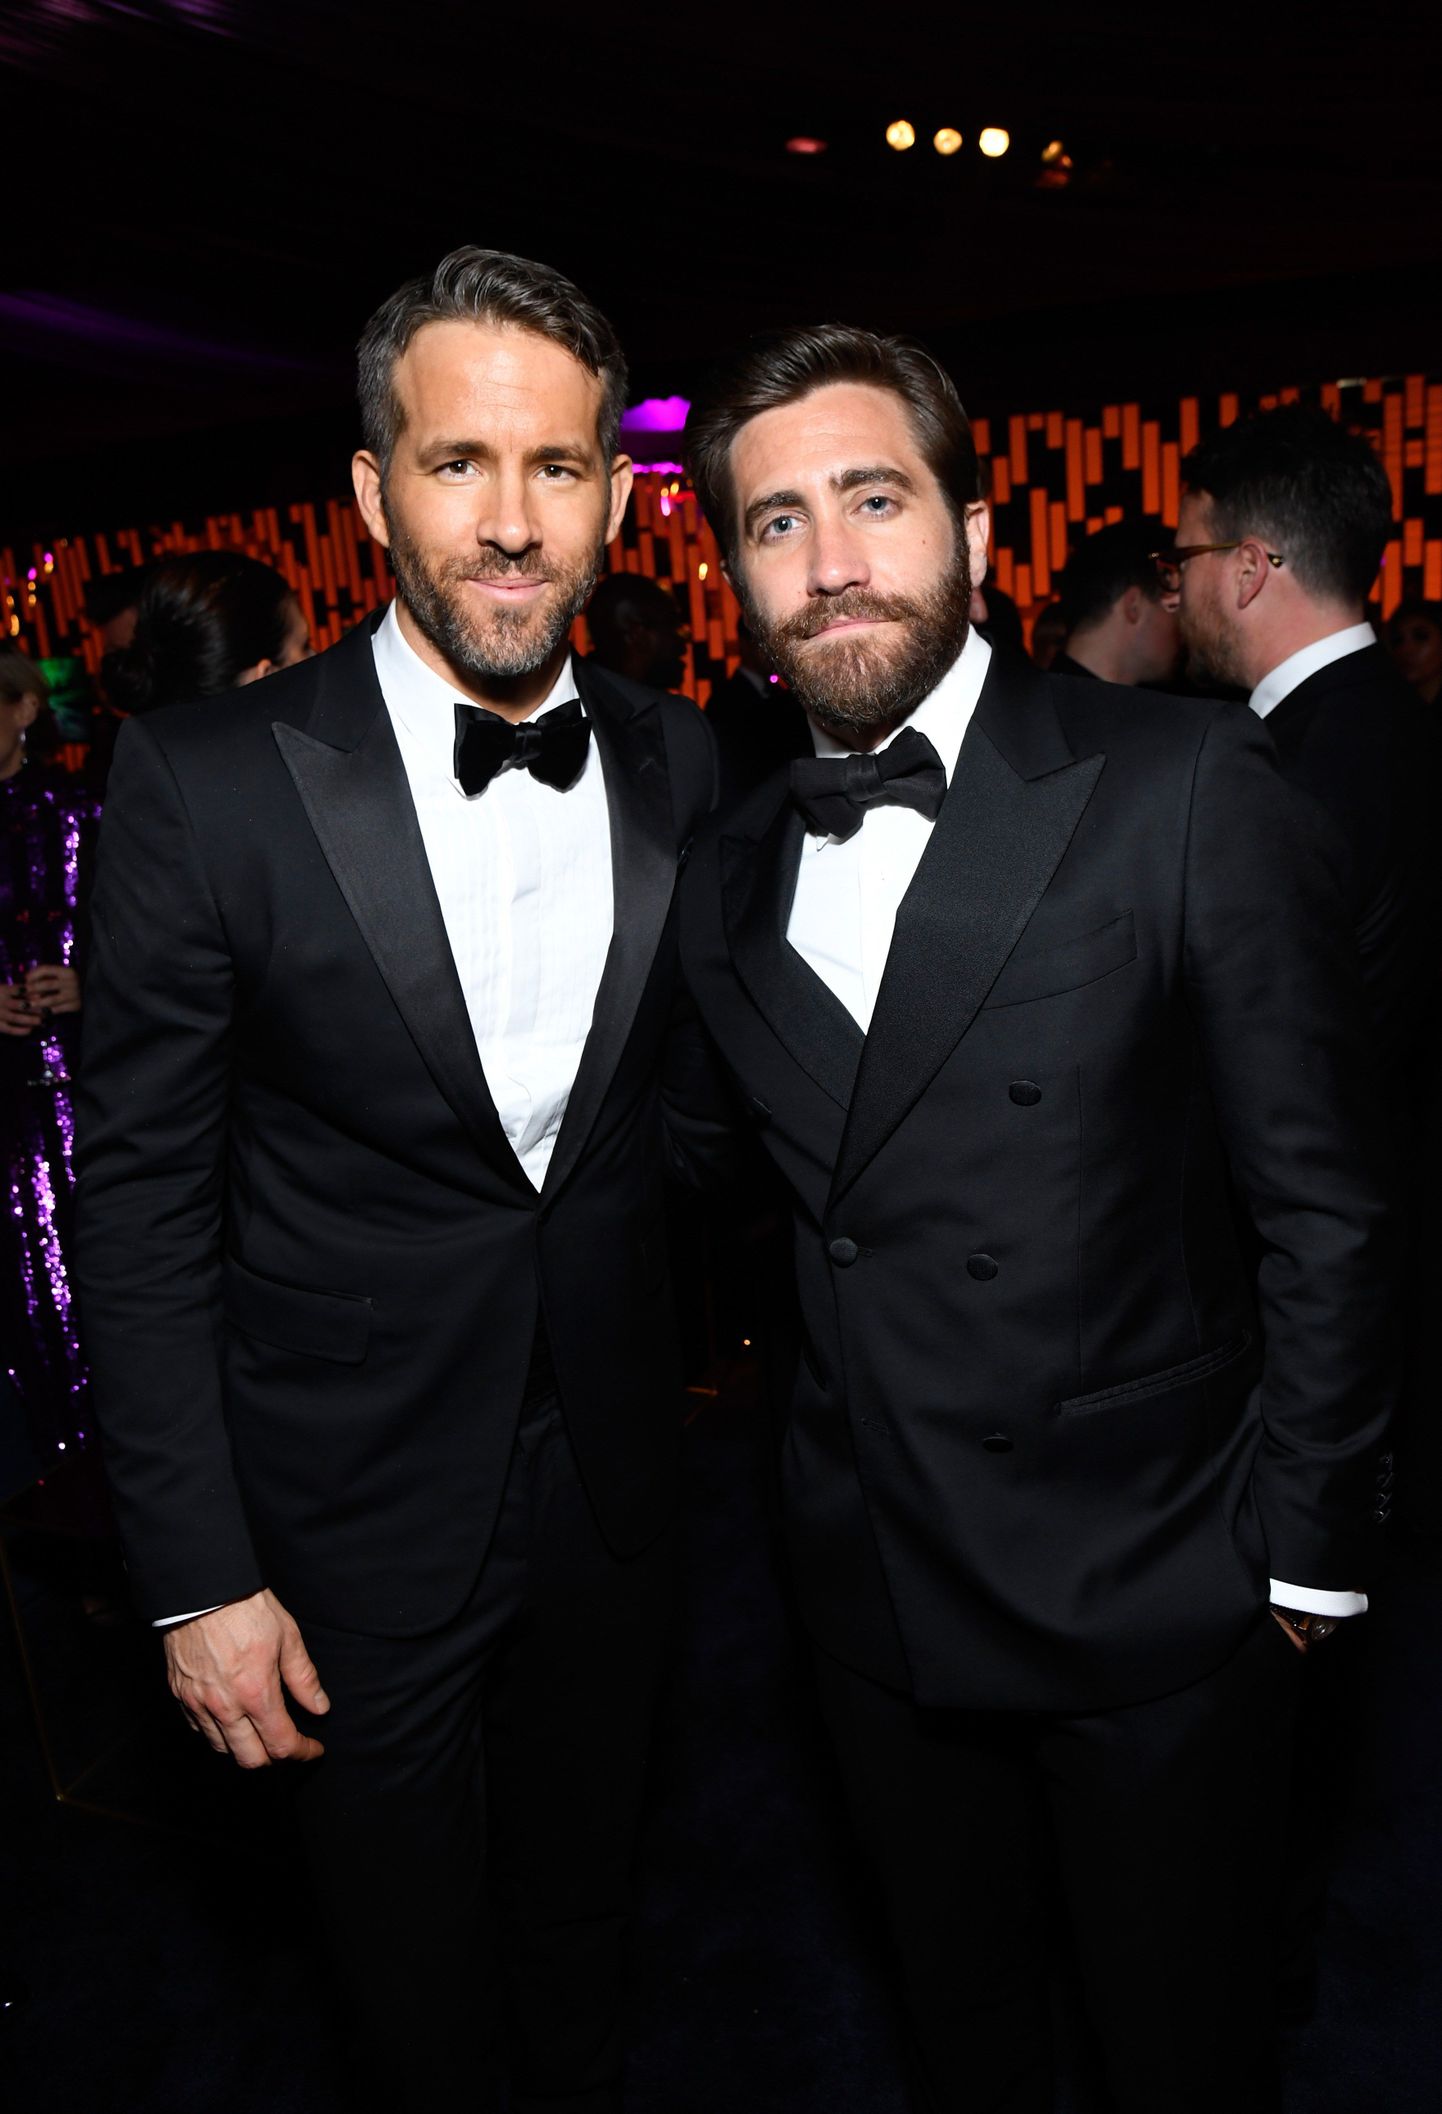 BEVERLY HILLS, CA - JANUARY 08: Actors Ryan Reynolds (L) and Jake Gyllenhaal attend The 2017 InStyle and Warner Bros. 73rd Annual Golden Globe Awards Post-Party at The Beverly Hilton Hotel on January 8, 2017 in Beverly Hills, California.   Matt Winkelmeyer/Getty Images for InStyle/AFP
== FOR NEWSPAPERS, INTERNET, TELCOS & TELEVISION USE ONLY ==